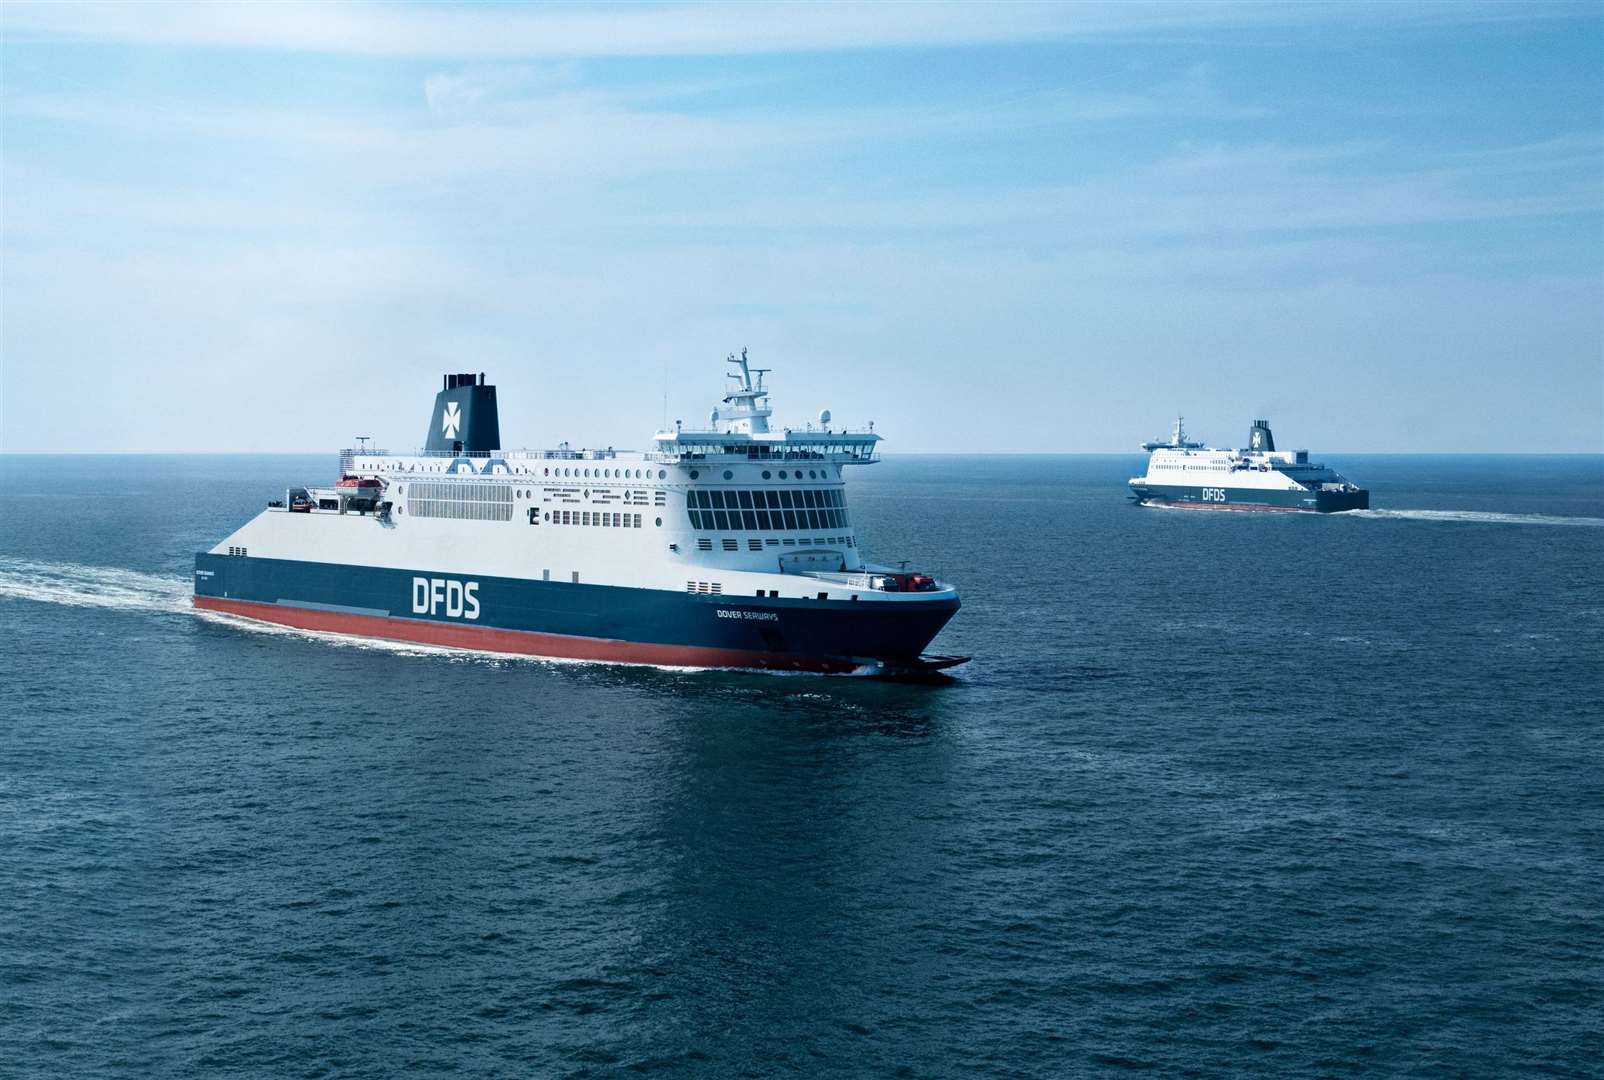 DFDS will offer one free weekend return trip to all Kent residents when Covid-19 restrictions are lifted